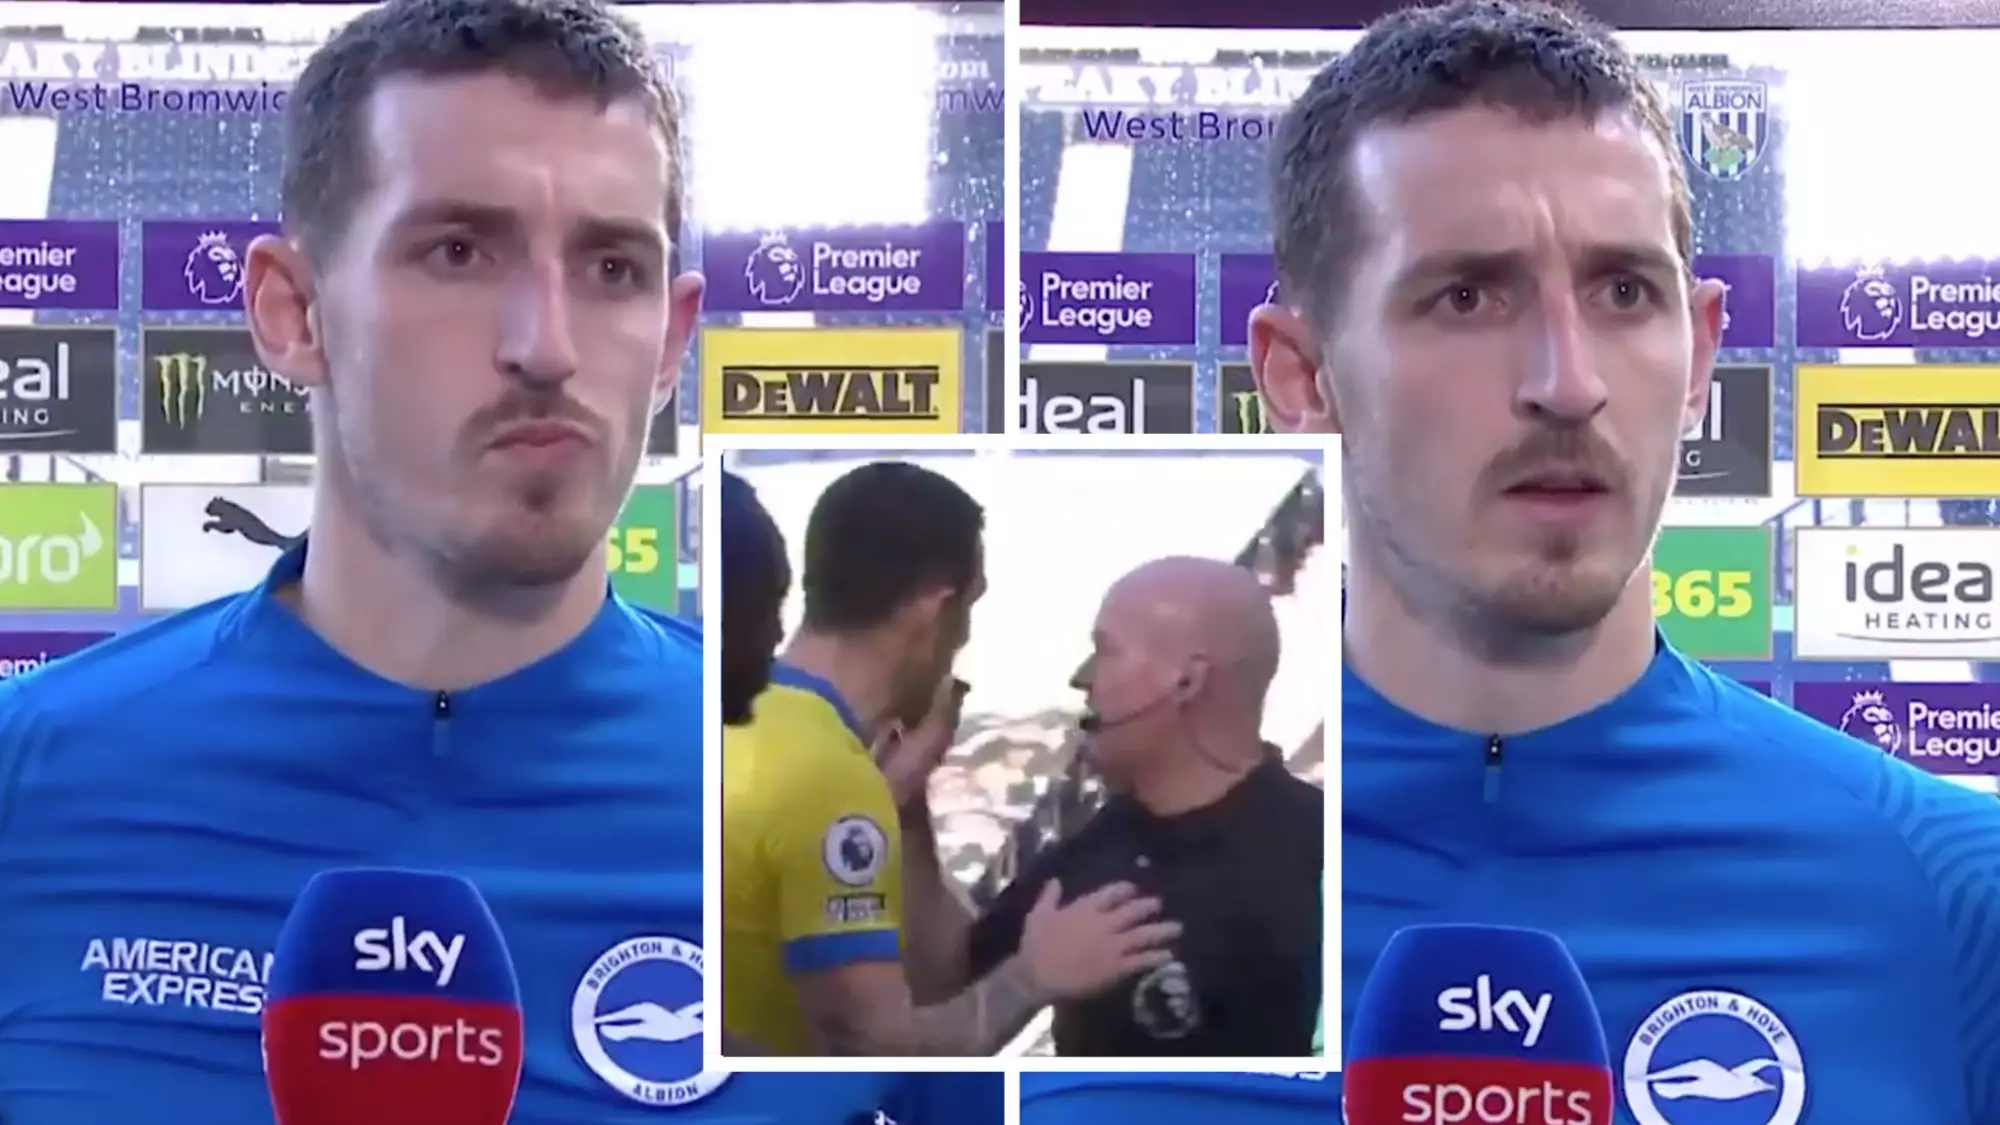 Lewis Dunk Gives Brutal Interview After Lee Mason Controversially Disallowed His Goal Against West Brom